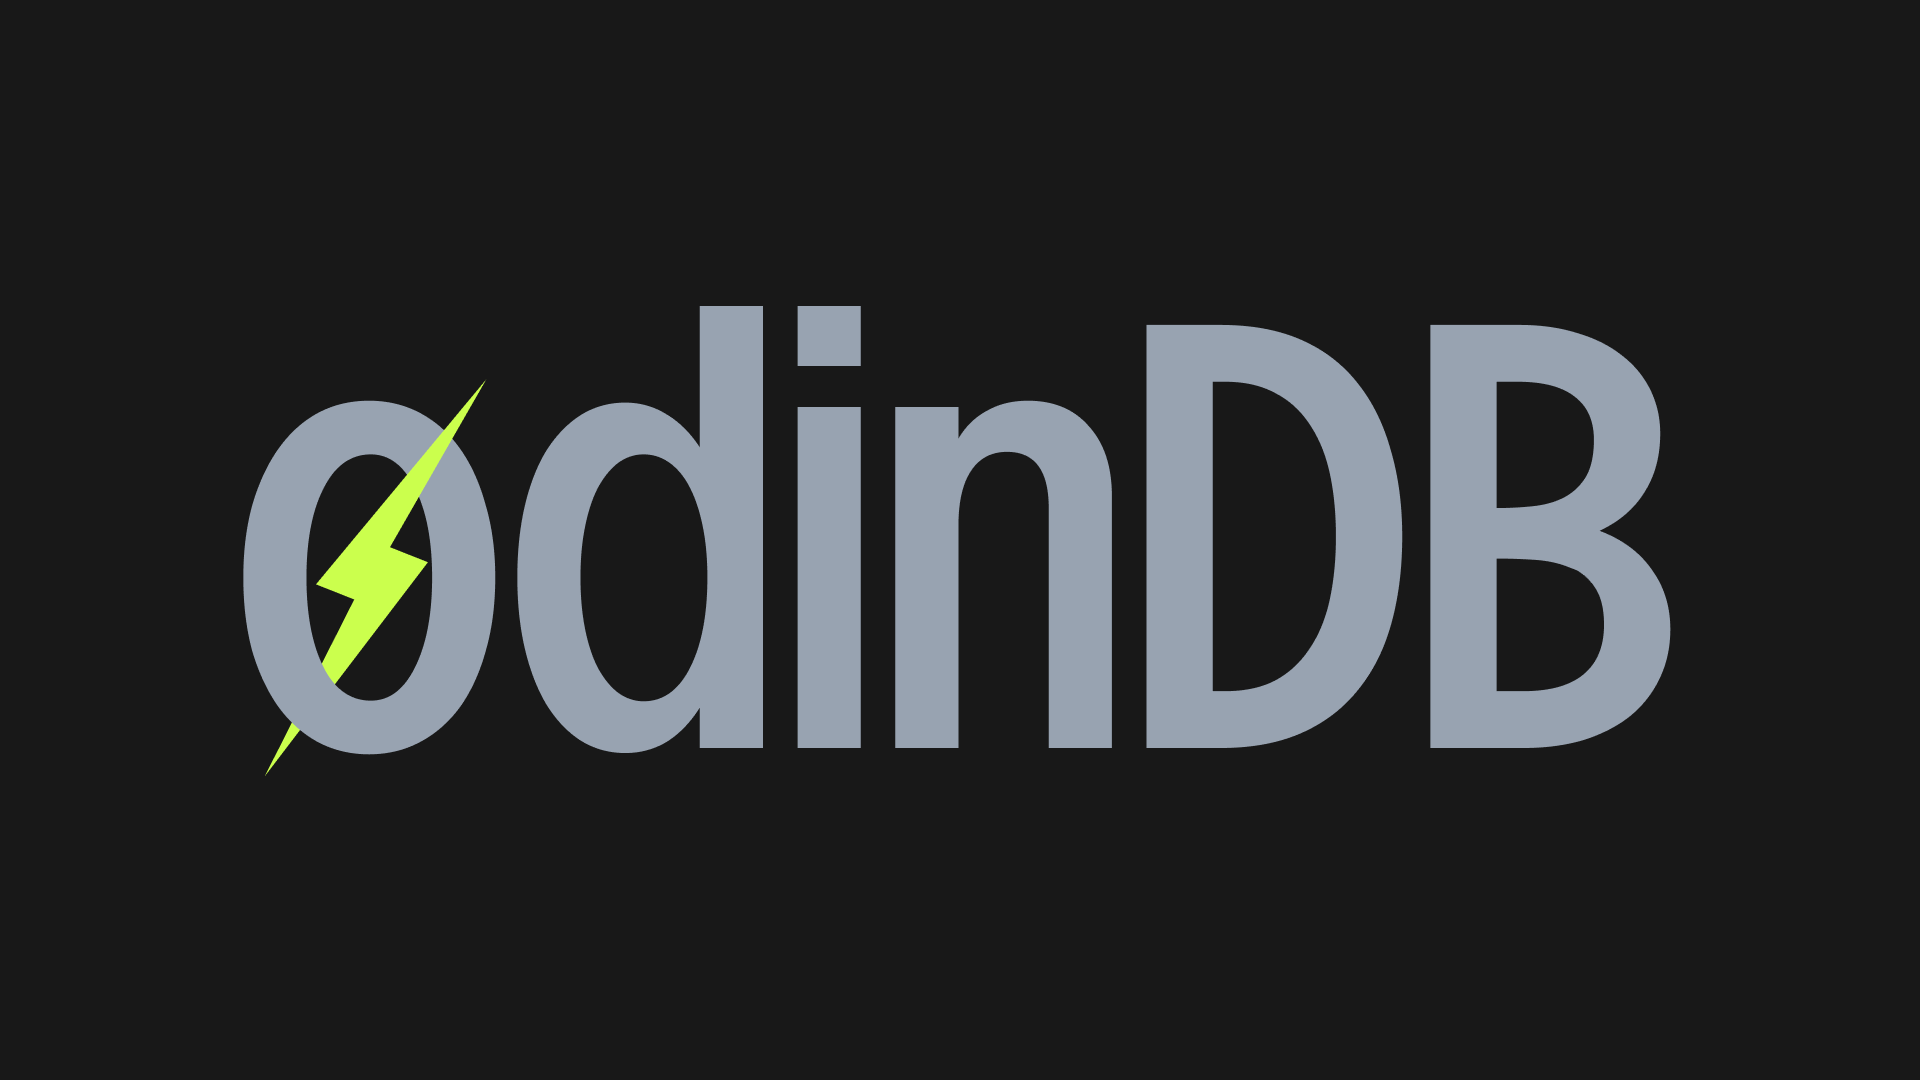 The OdinDB wordmark, inspired by the Norse god of wisdom and thunder